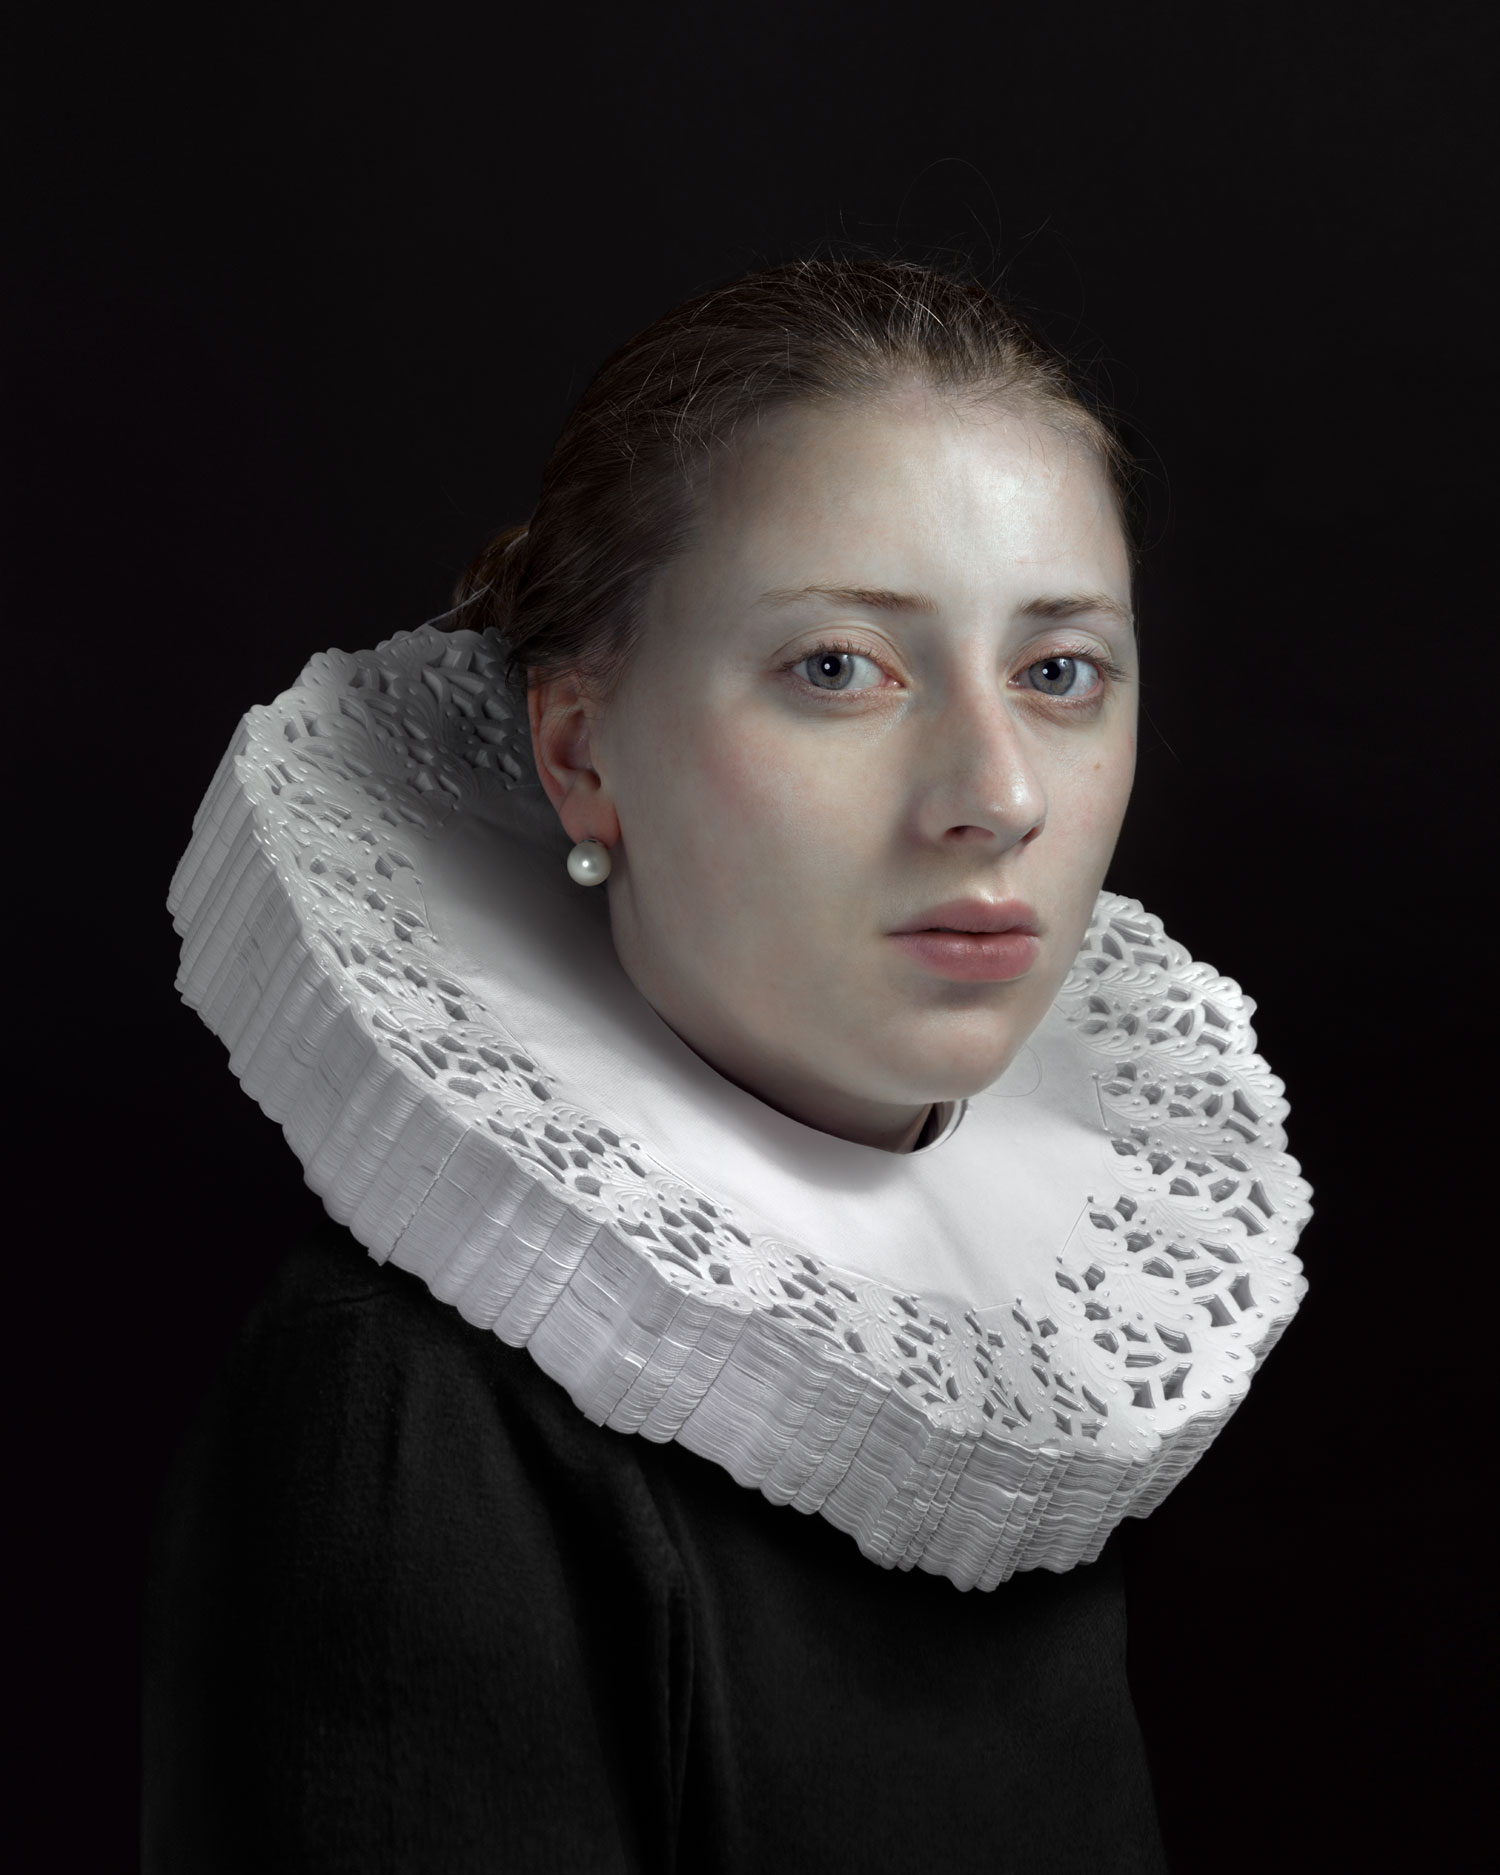 A portrait of a person wearing a white collar and black sweater.